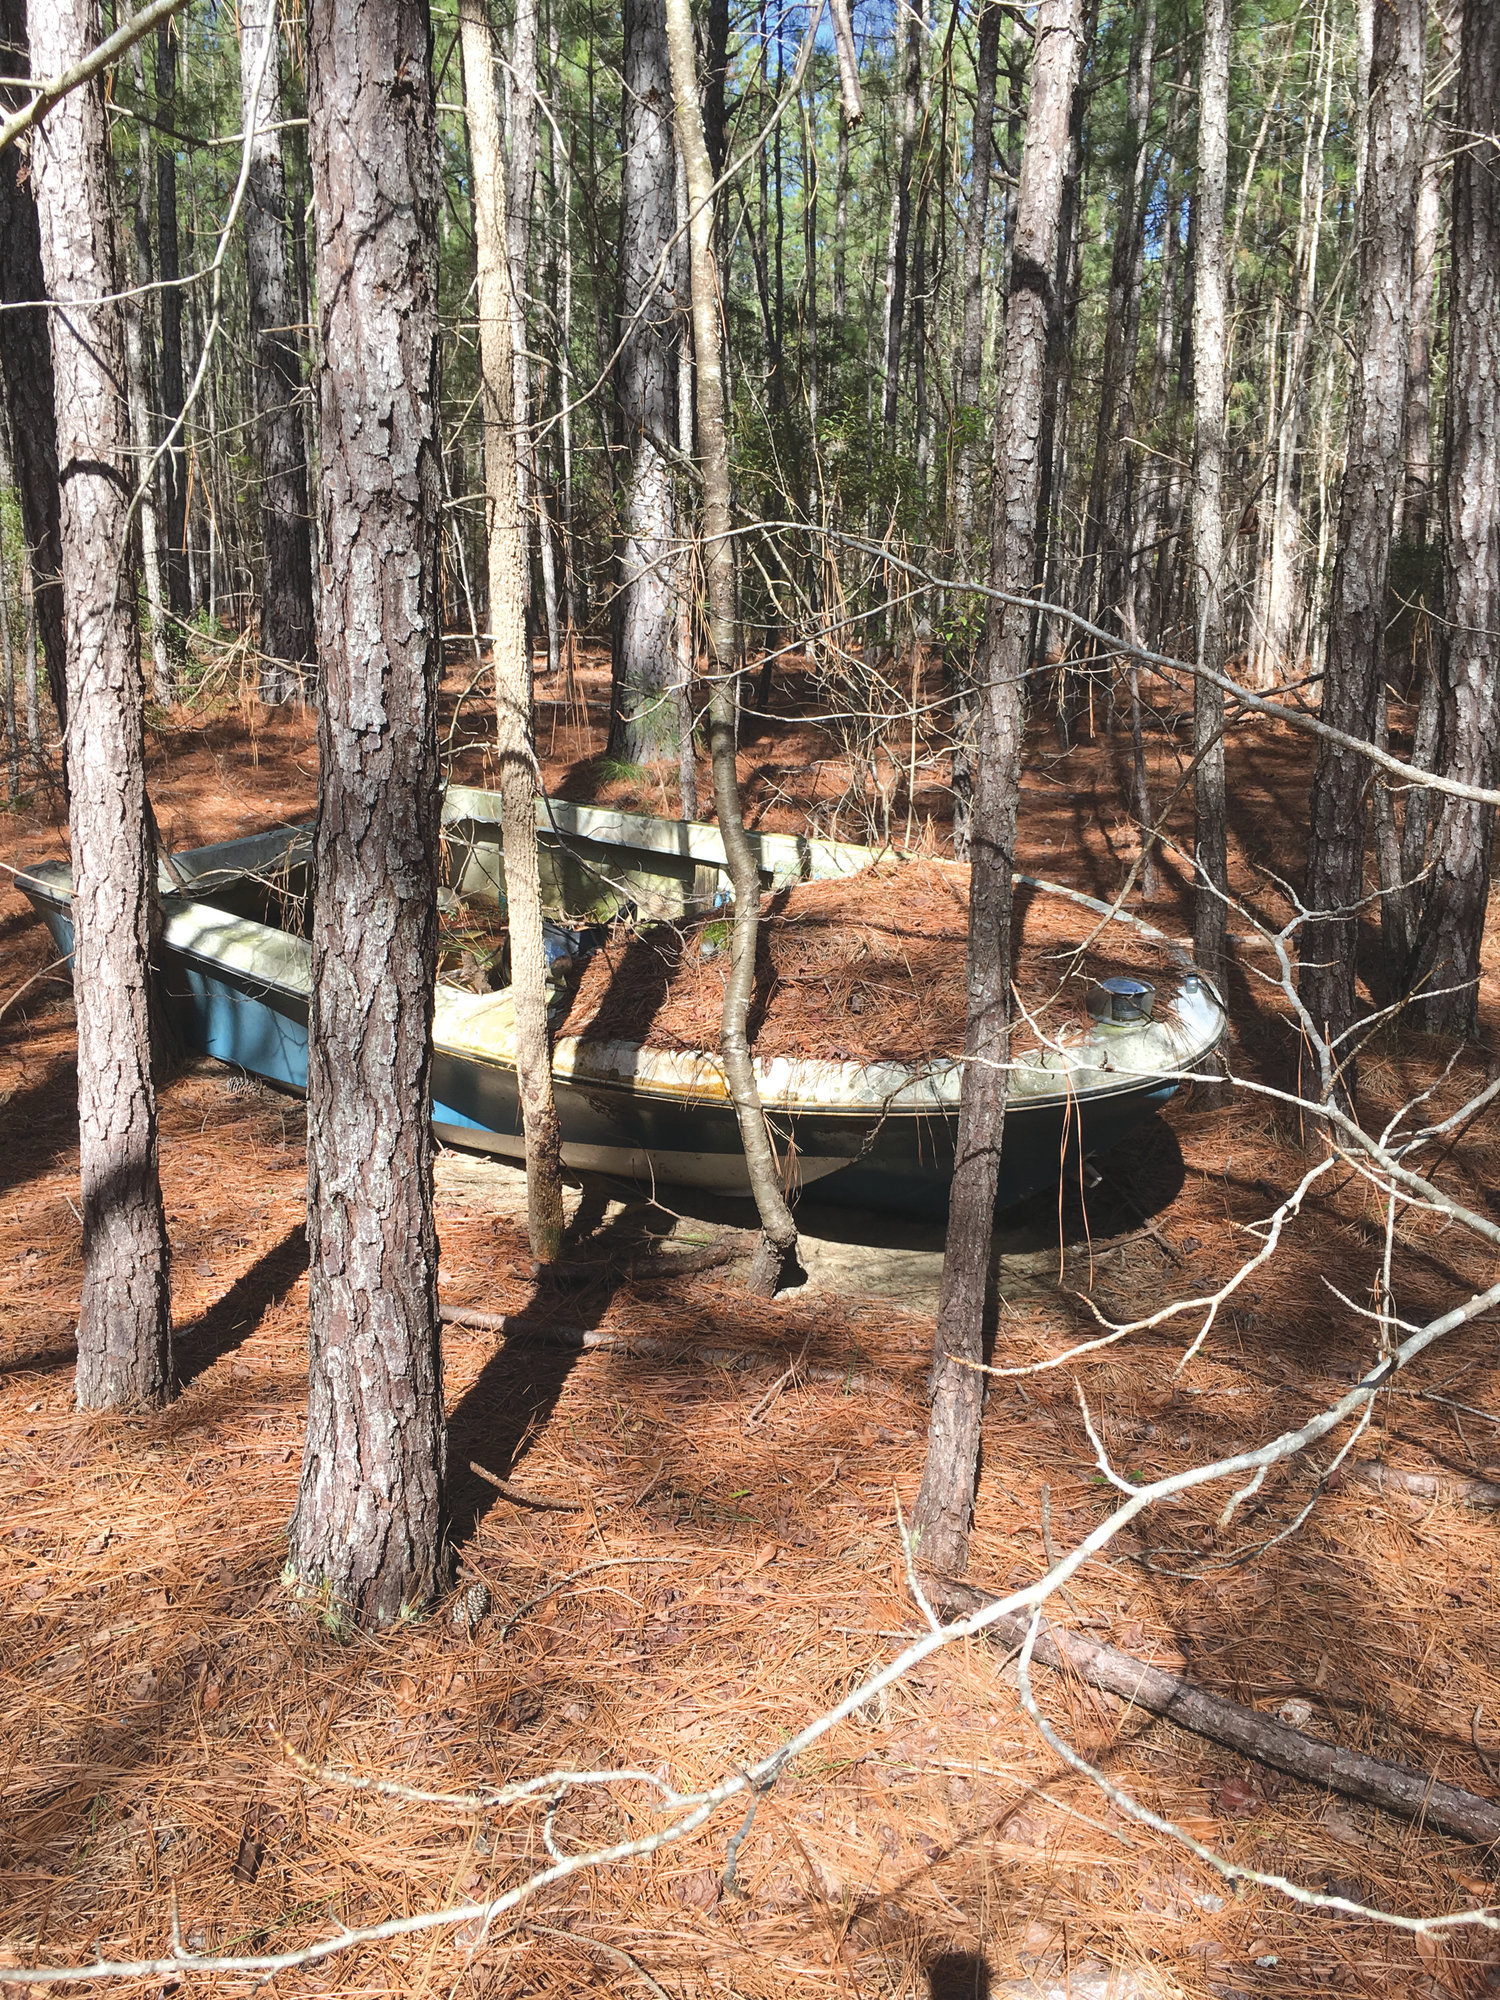 A speed boat is seen out in a stand of volunteer pines.